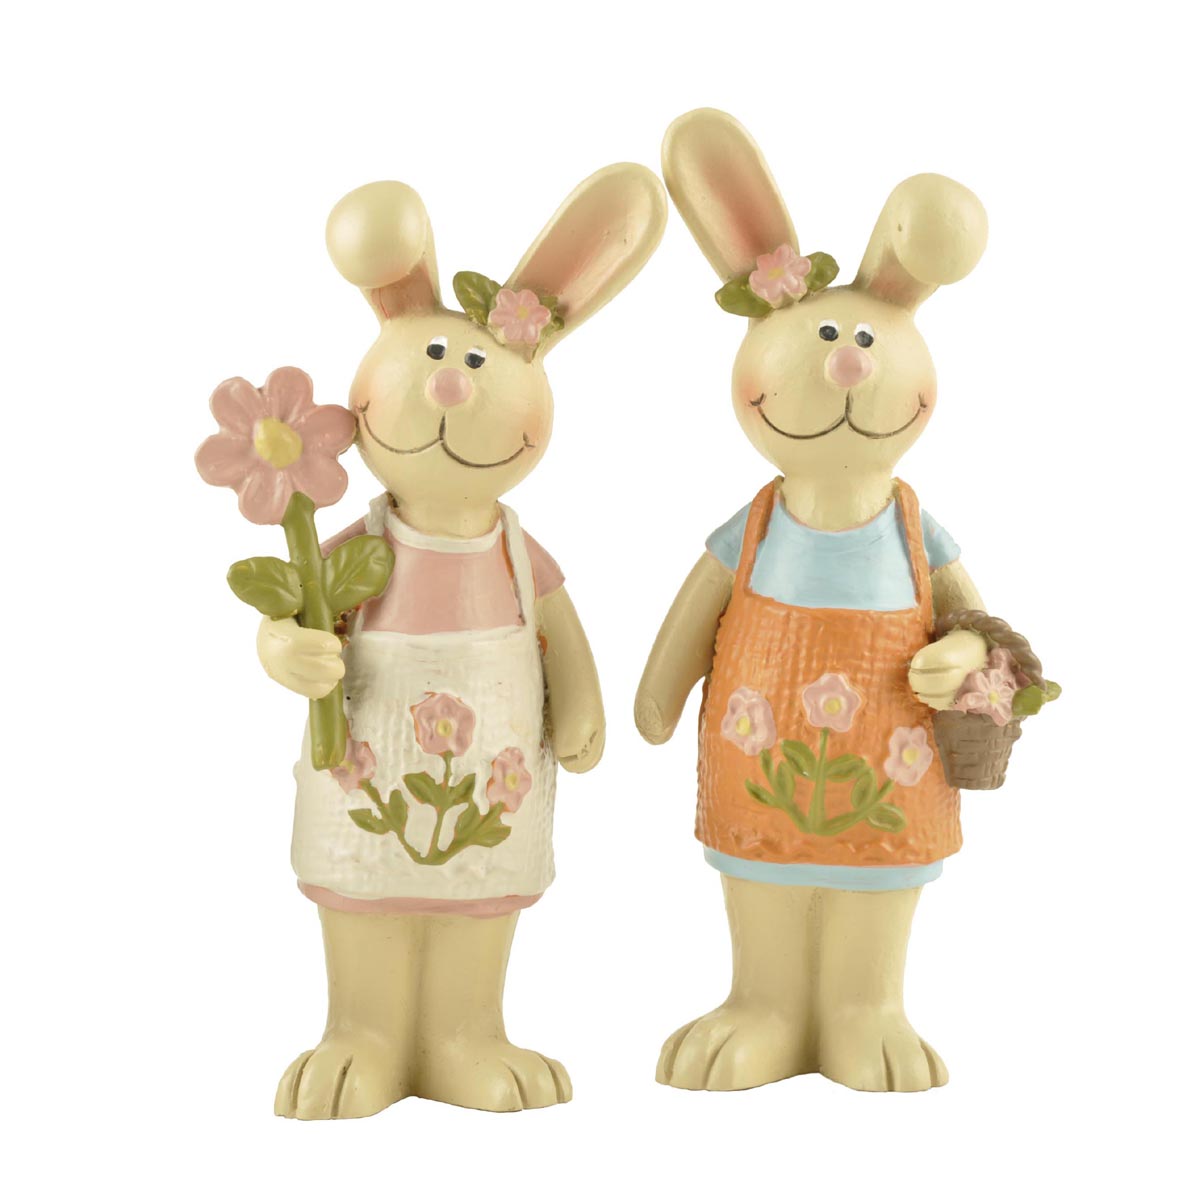 Ennas easter figurines oem for holiday gift-1